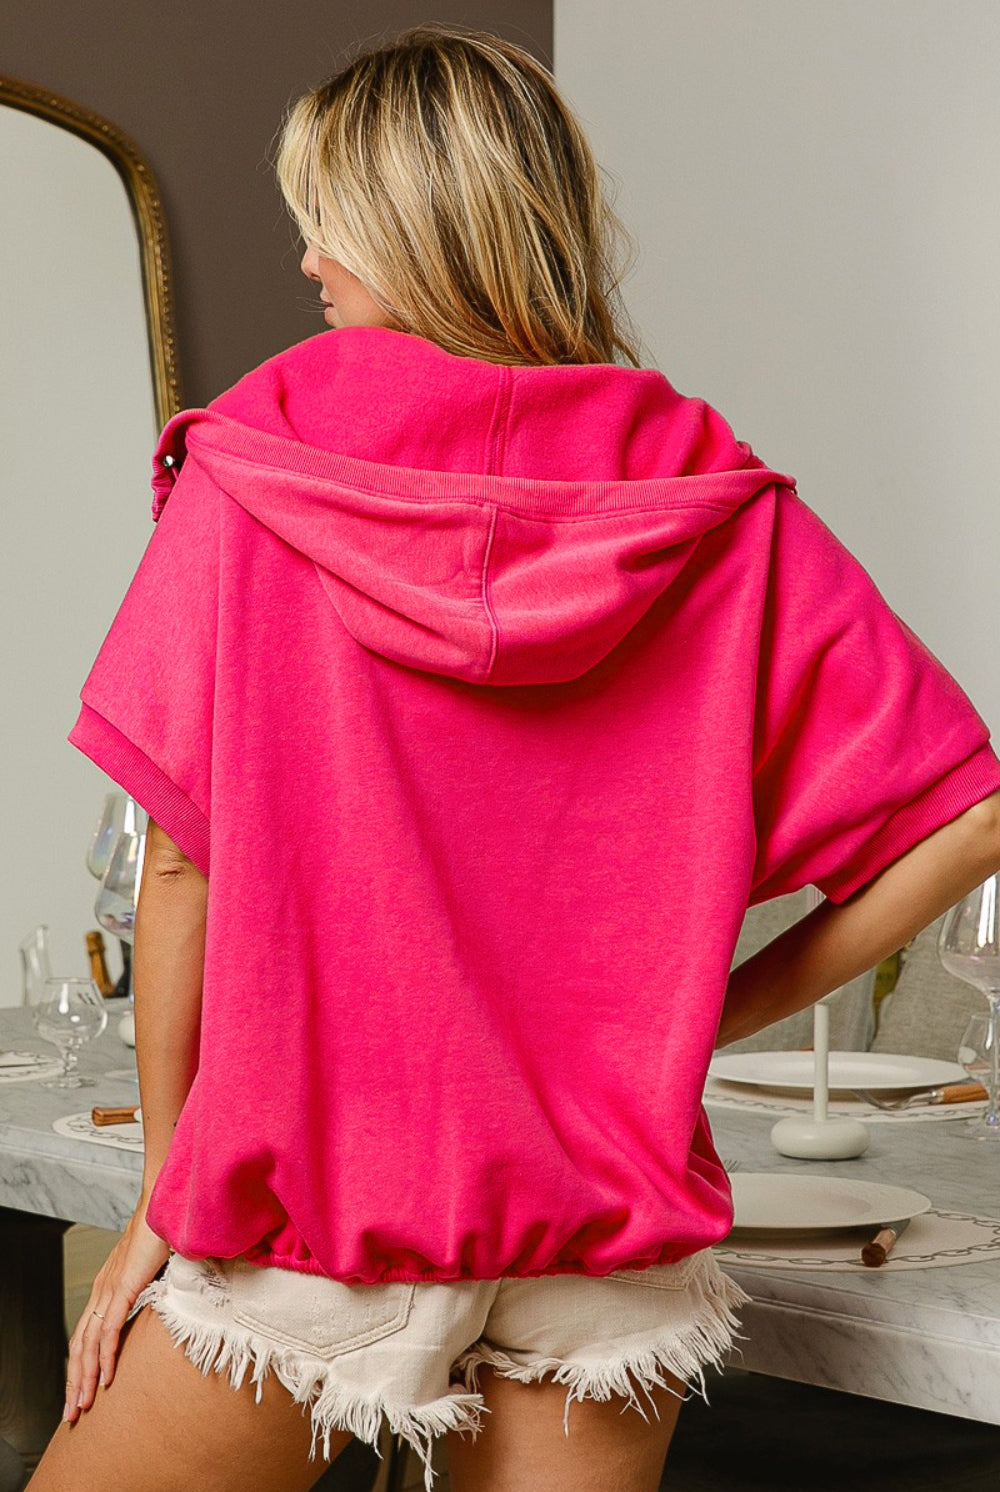 A woman models a vibrant pink short sleeve half zip up French Terry hoodie, with the hood draped elegantly over her wavy blonde hair. She stands in a stylish room, looking off to the side, with the zipper slightly open to give a relaxed vibe. The hoodie features a kangaroo pocket, adding a casual touch to the chic and sporty look.